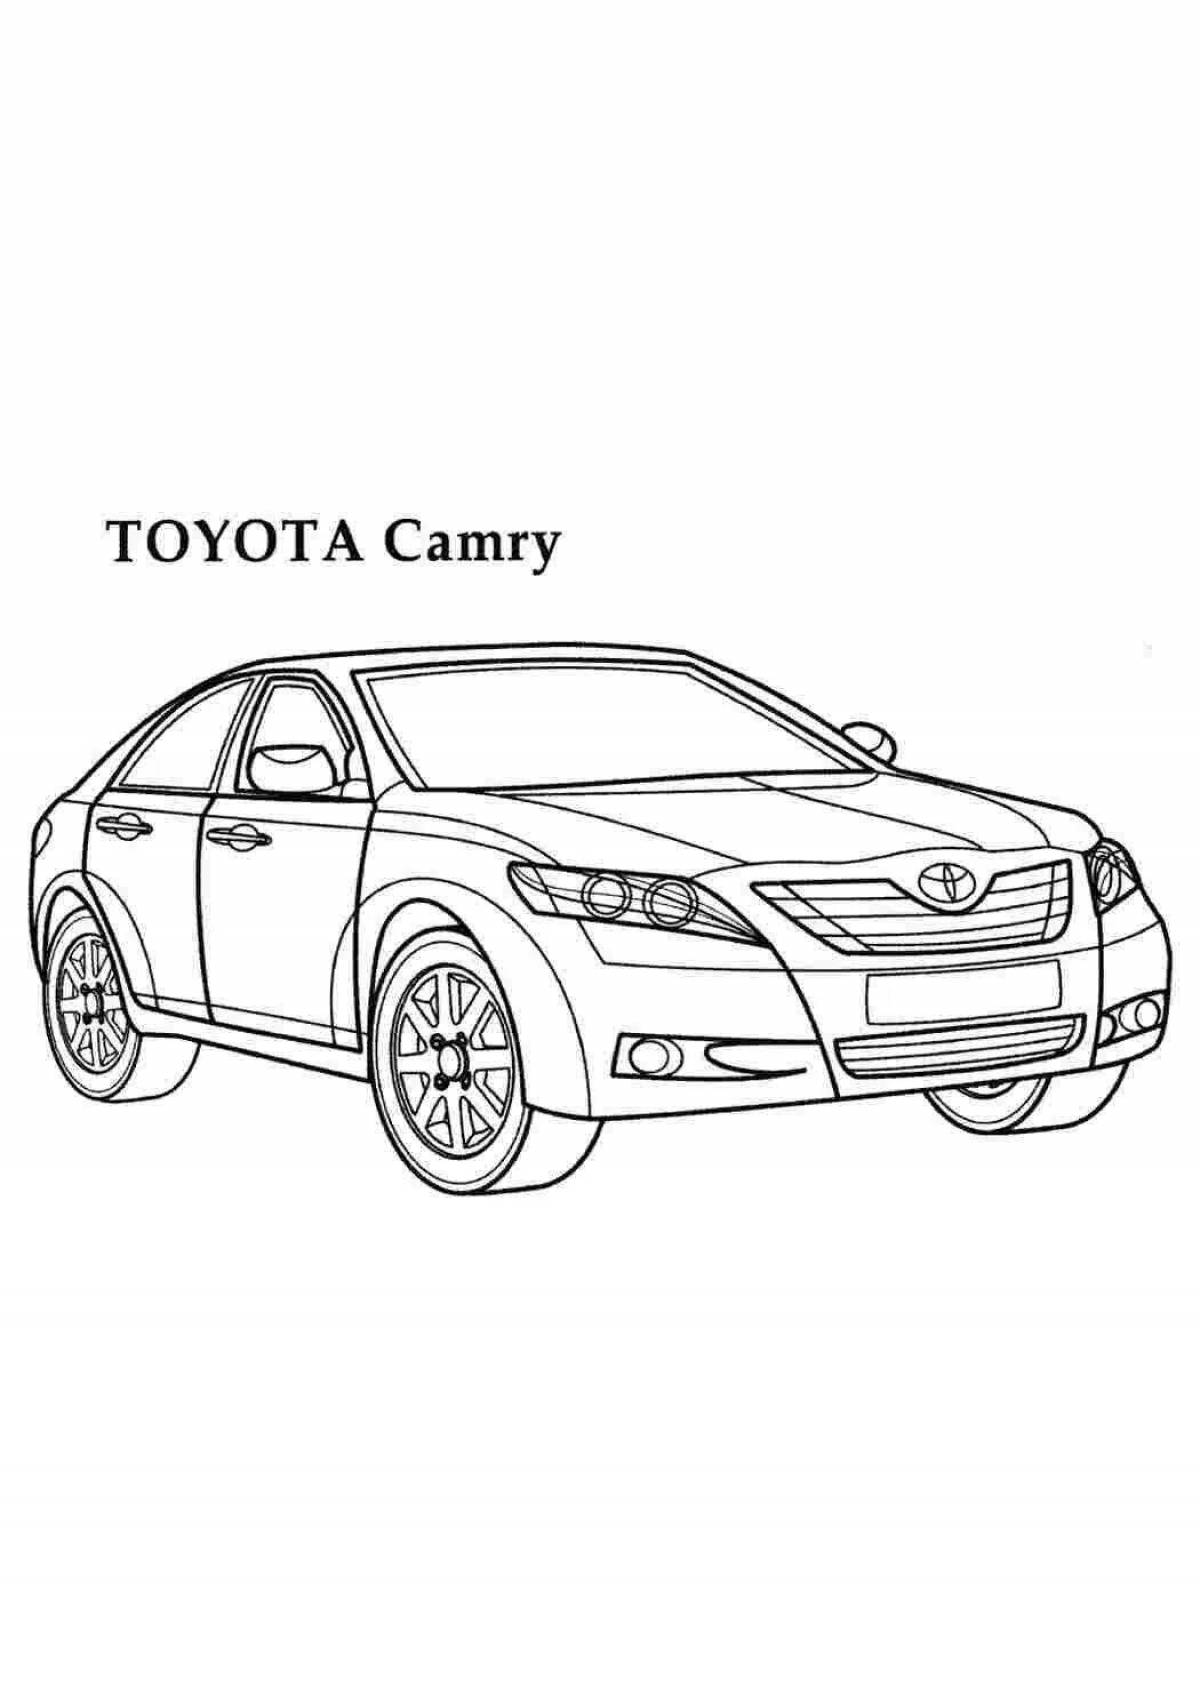 Fabulous Camry coloring book